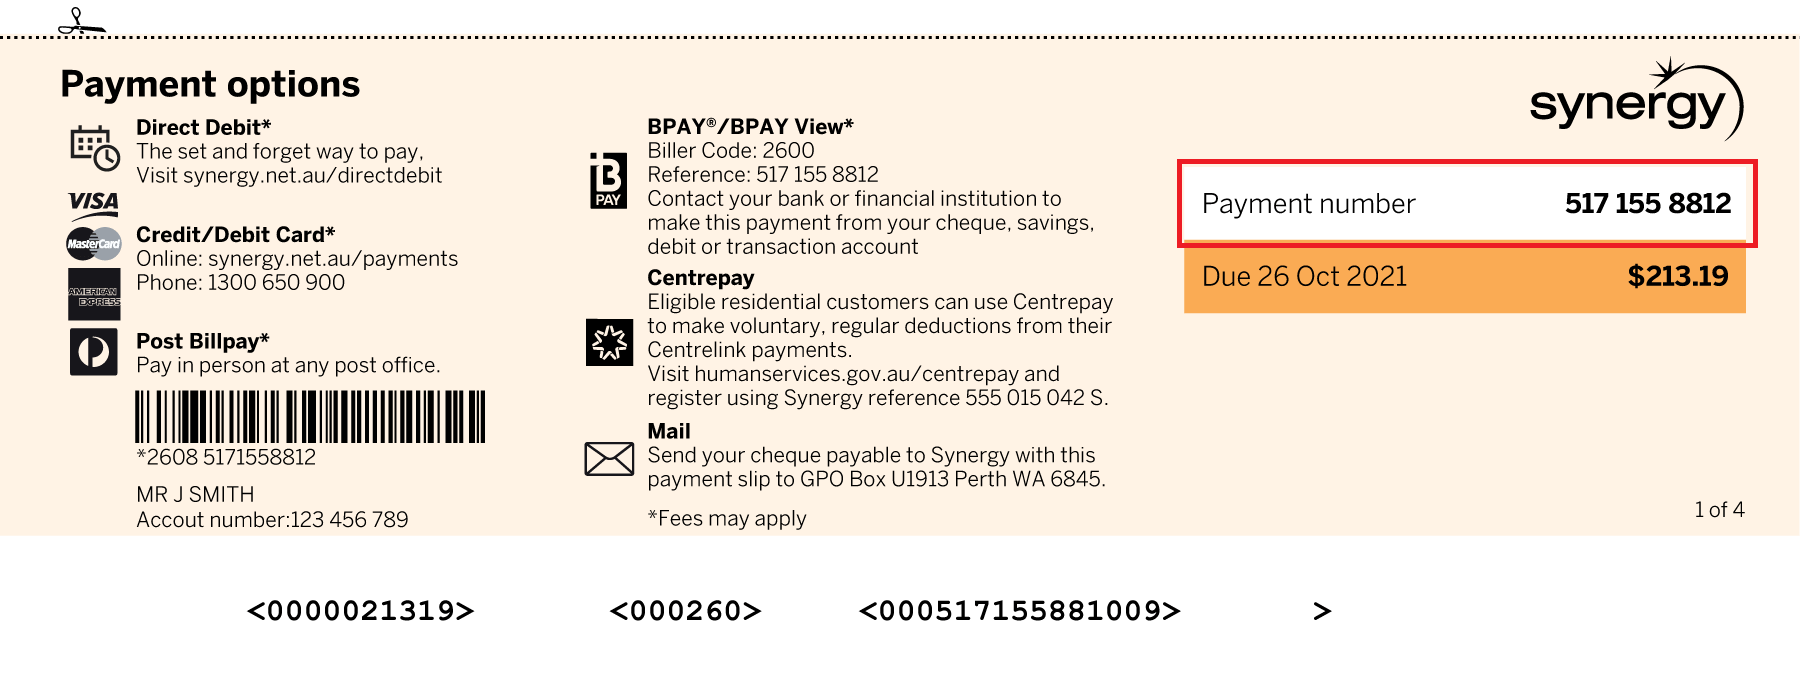 Image showing payment options and payment number on a Synergy bill